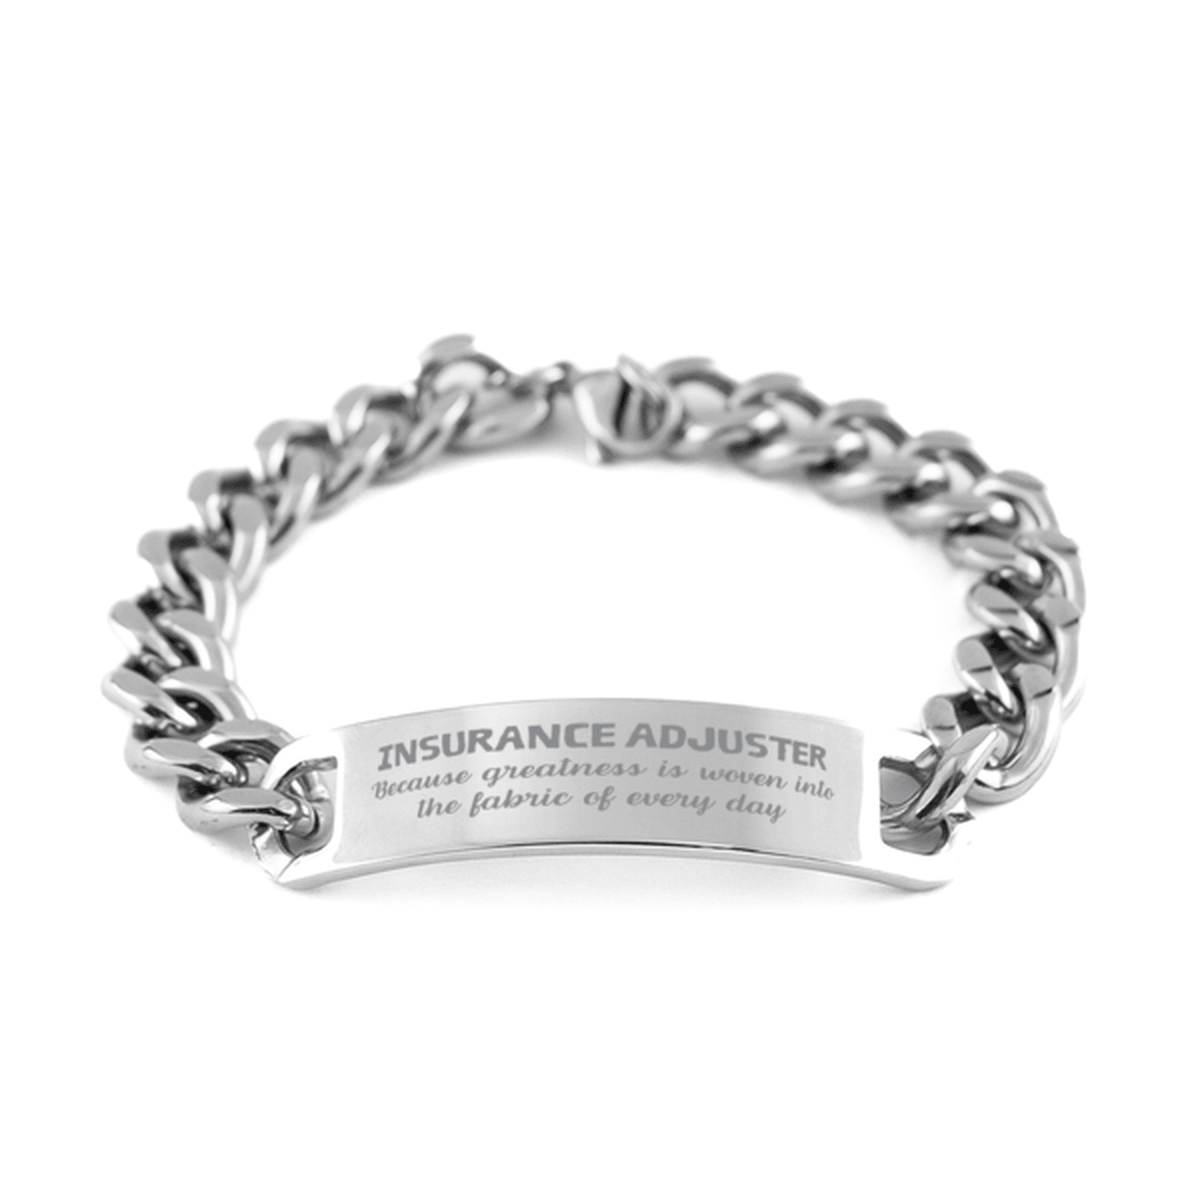 Sarcastic Insurance Adjuster Cuban Chain Stainless Steel Bracelet Gifts, Christmas Holiday Gifts for Insurance Adjuster Birthday, Insurance Adjuster: Because greatness is woven into the fabric of every day, Coworkers, Friends - Mallard Moon Gift Shop